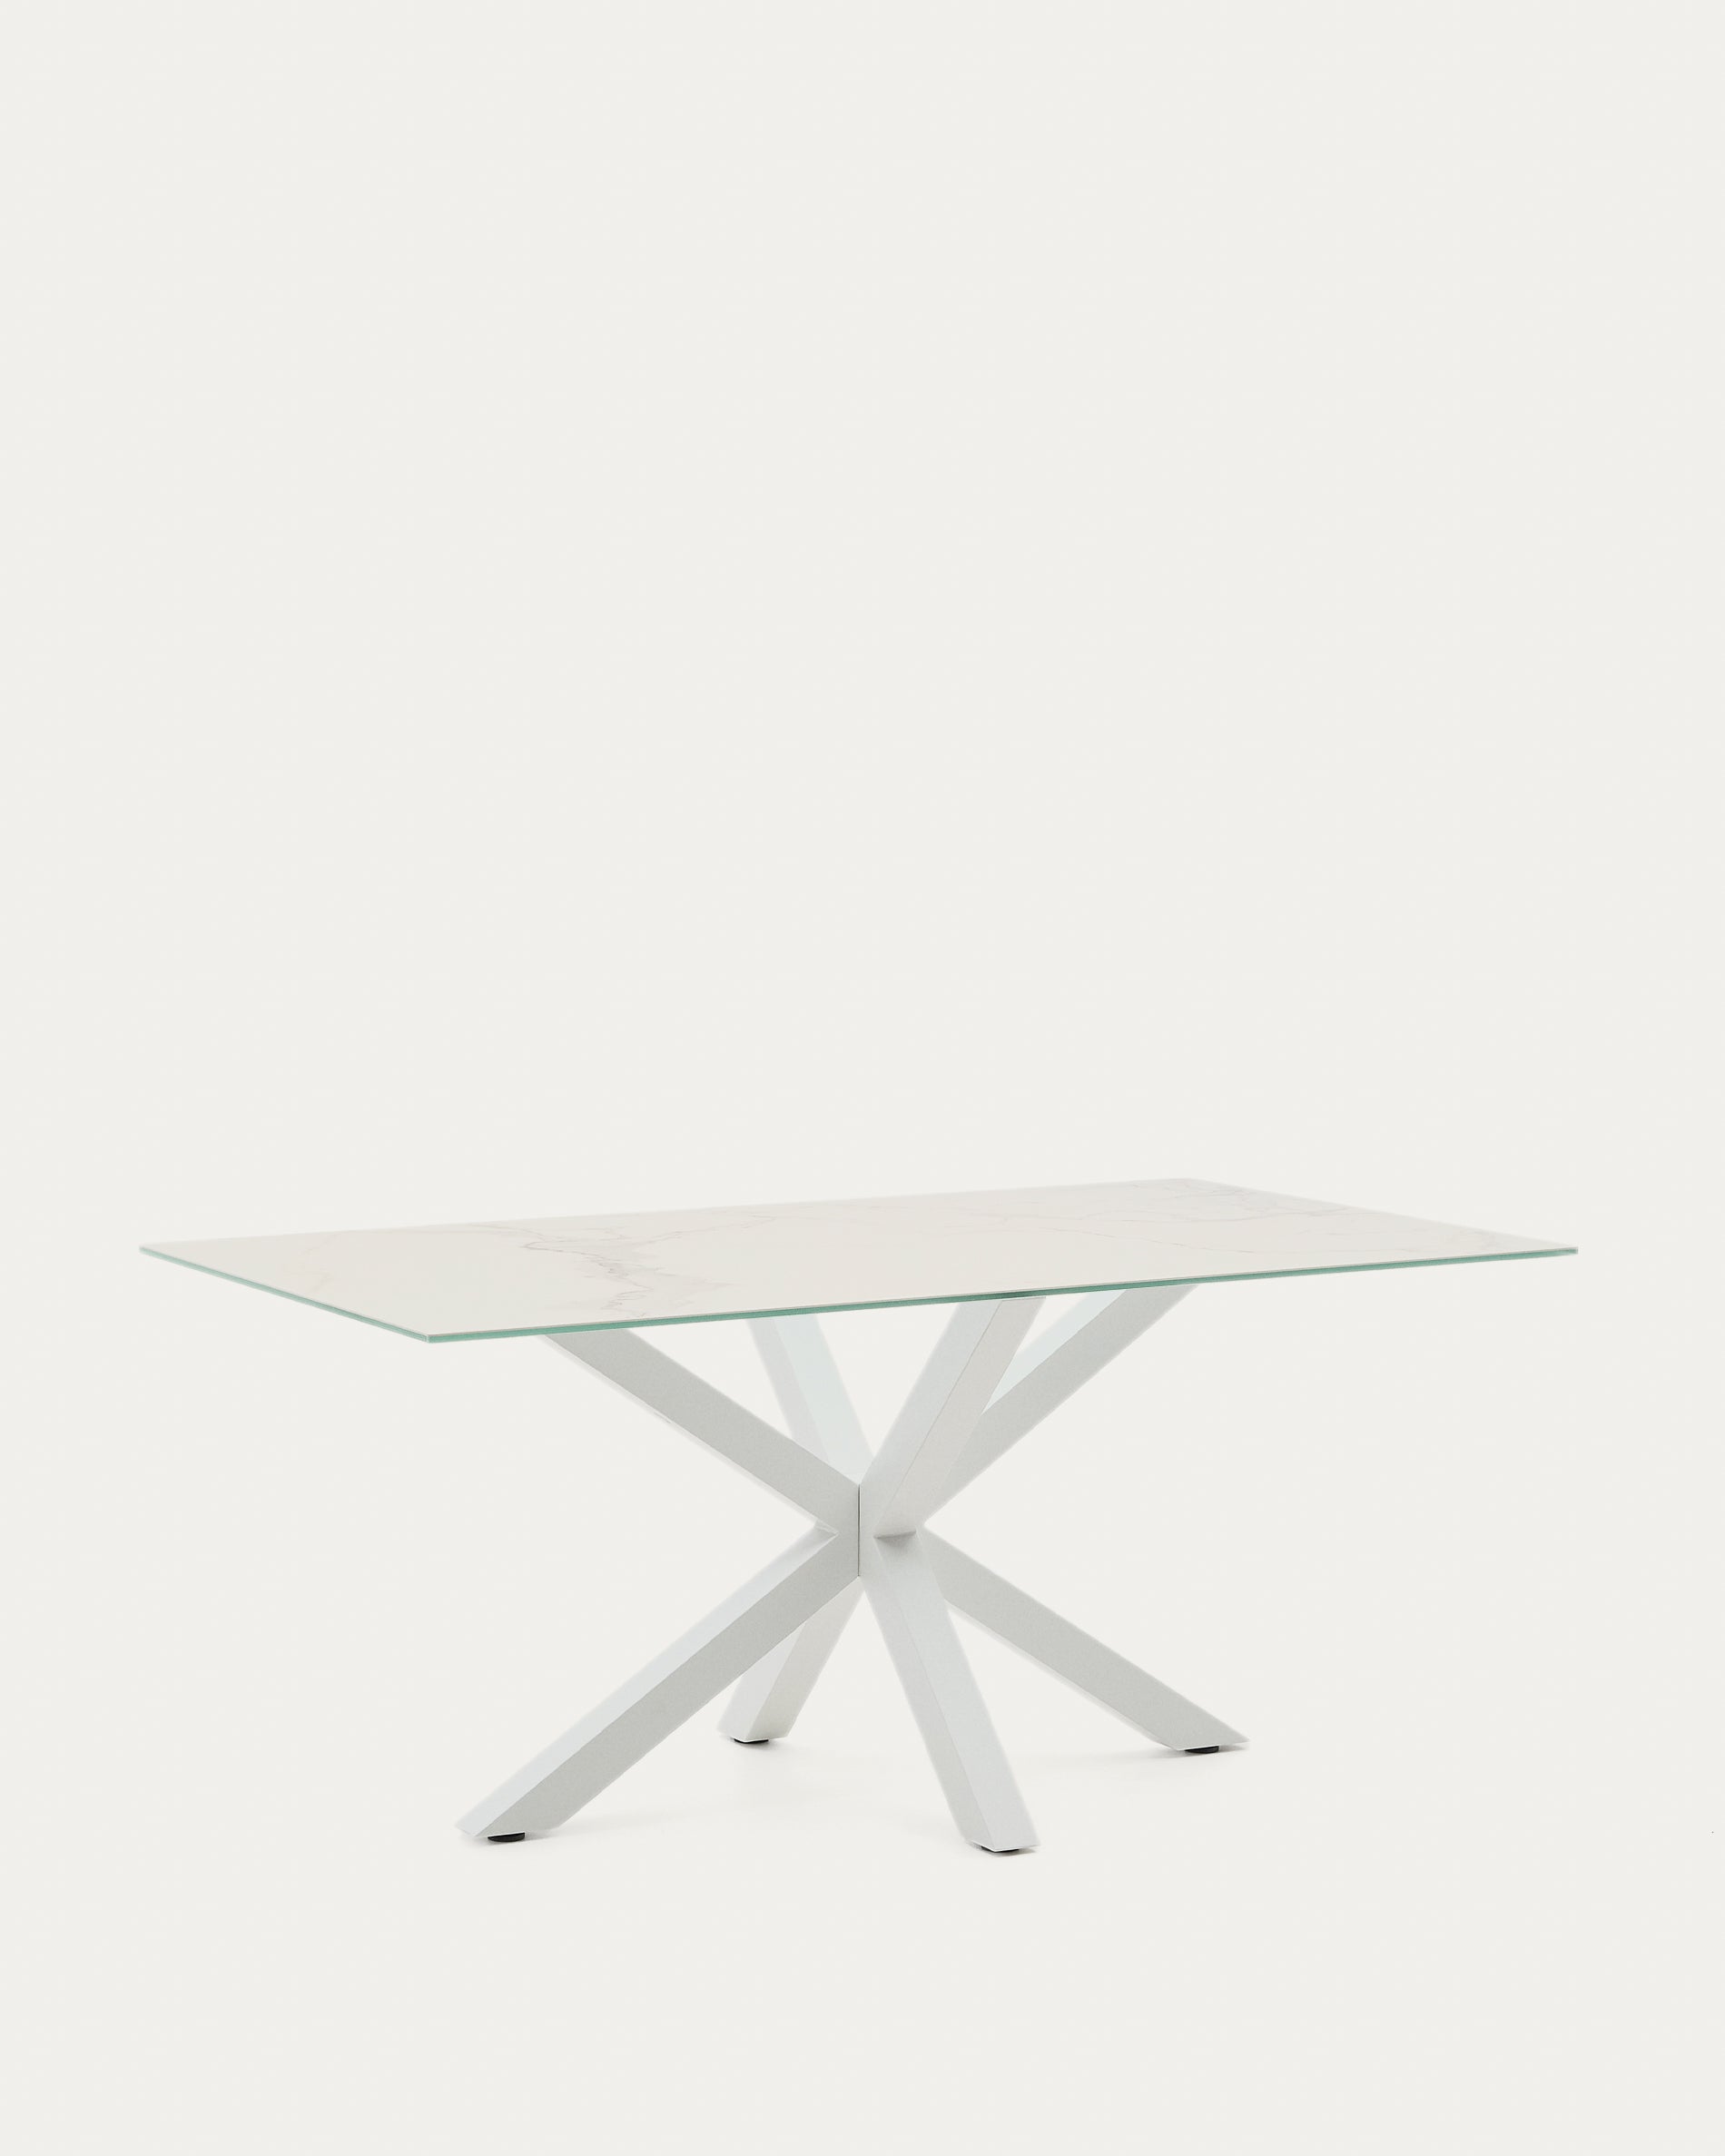 Argo table in white Kalos porcelain and steel legs with white finish, 160 x 90 cm